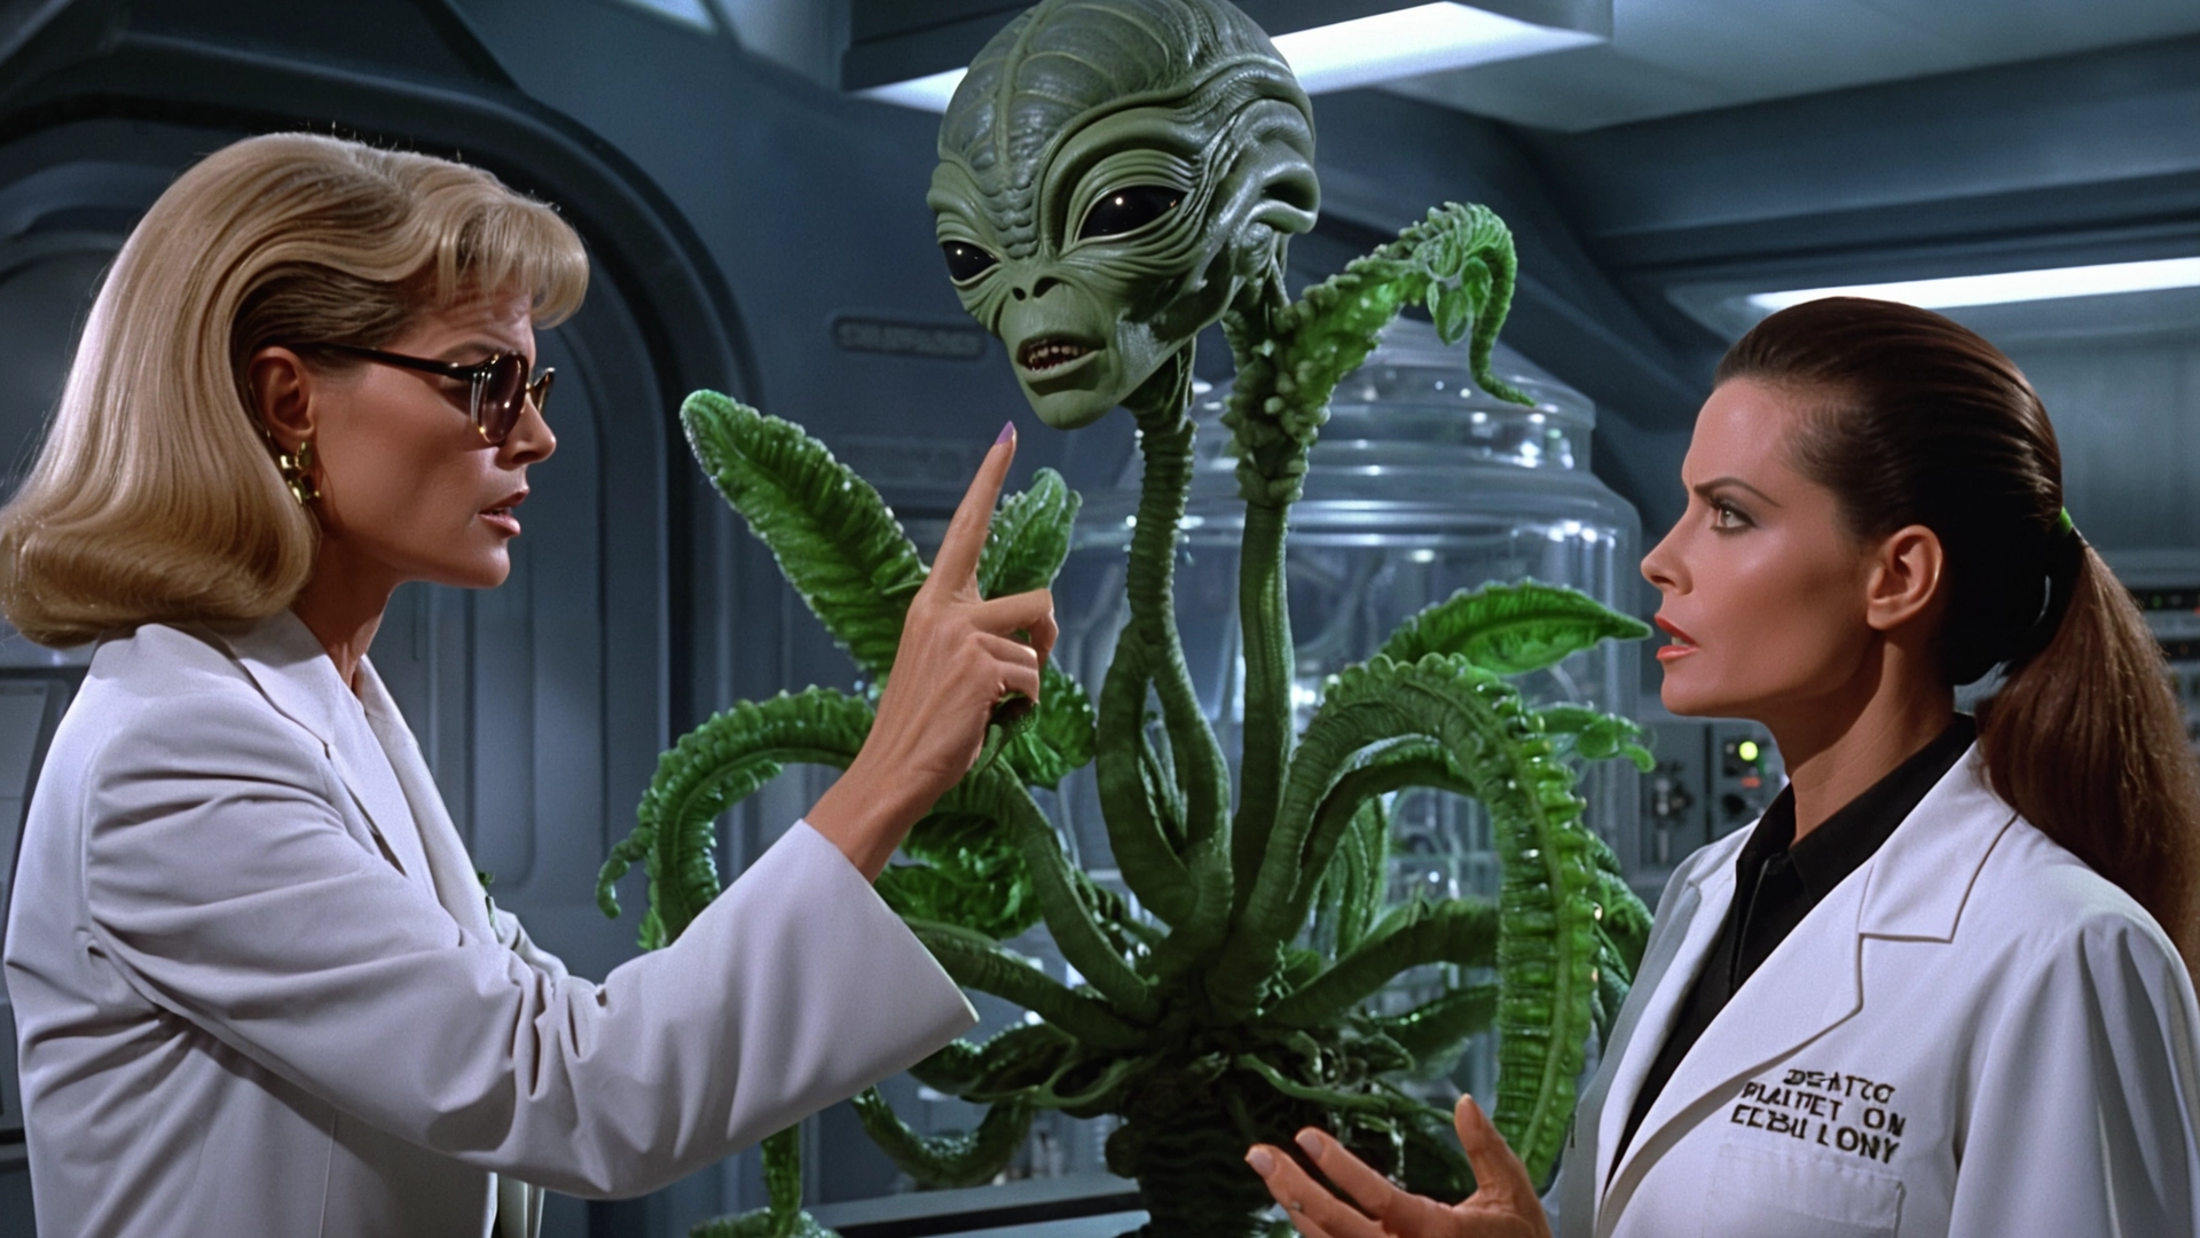 Two women pointing at a large green alien sculpture in a lab setting.